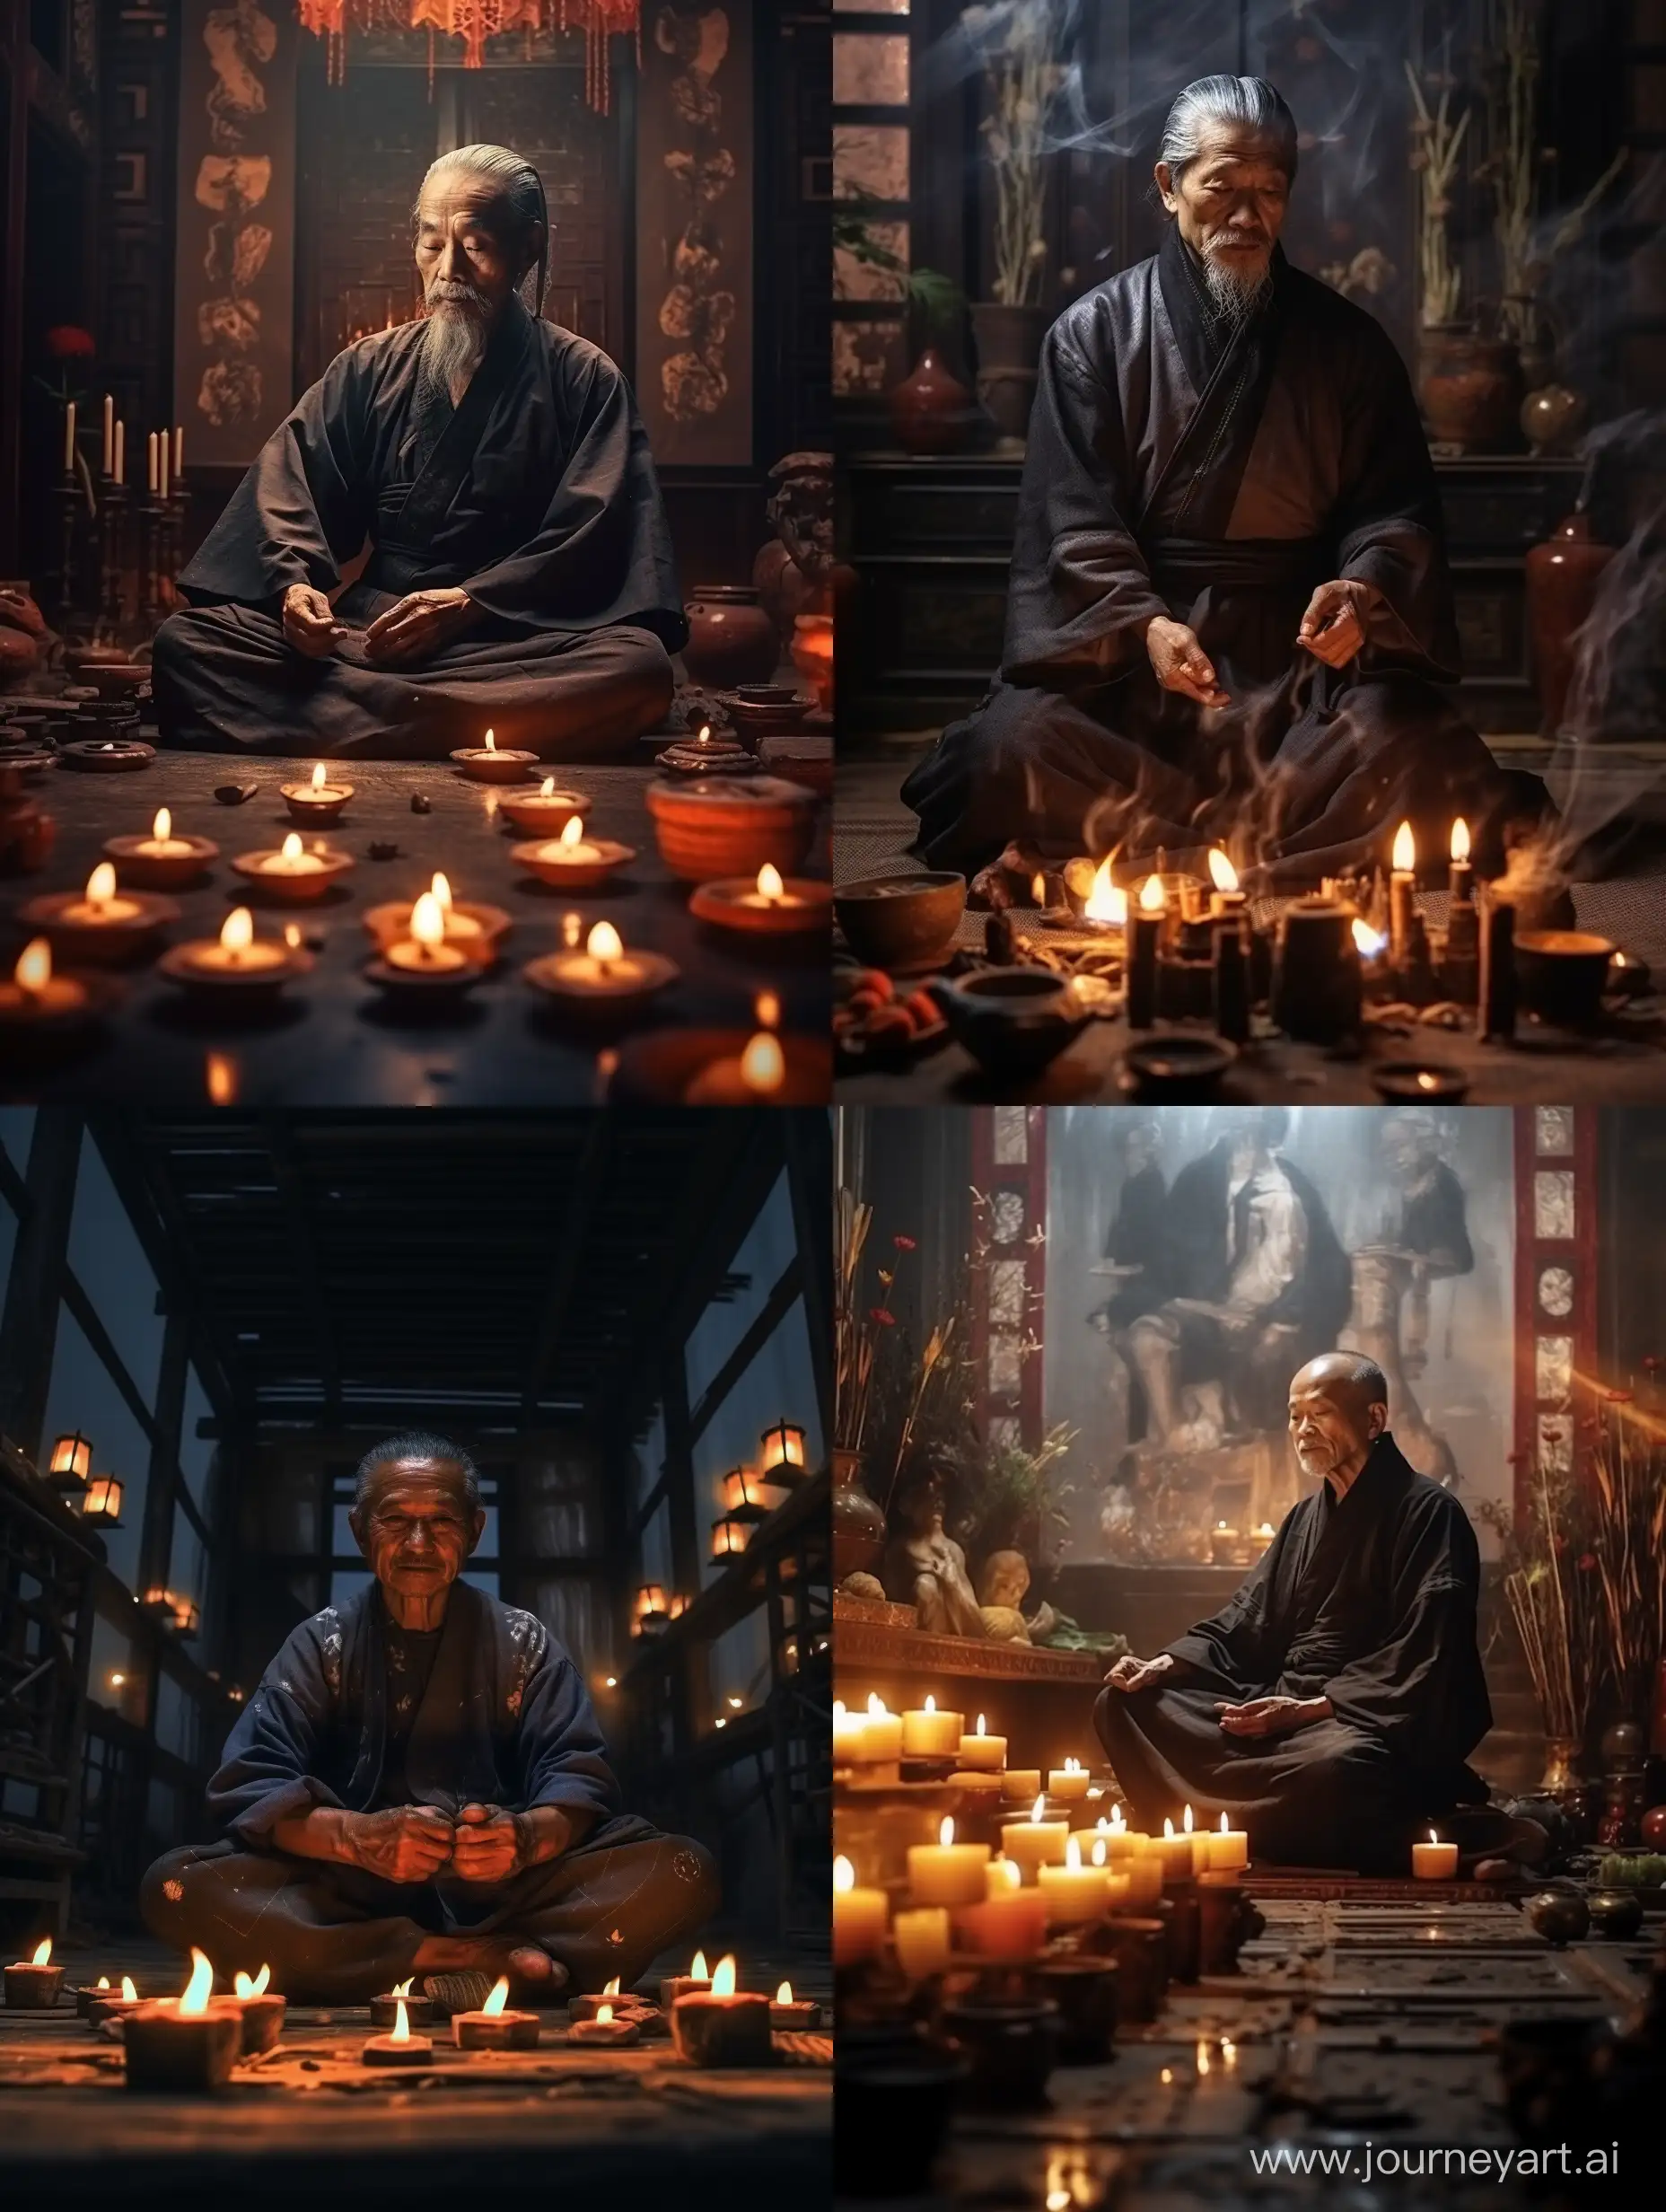 Ancient-Chinese-Sage-Illuminating-the-Future-with-Candlelight